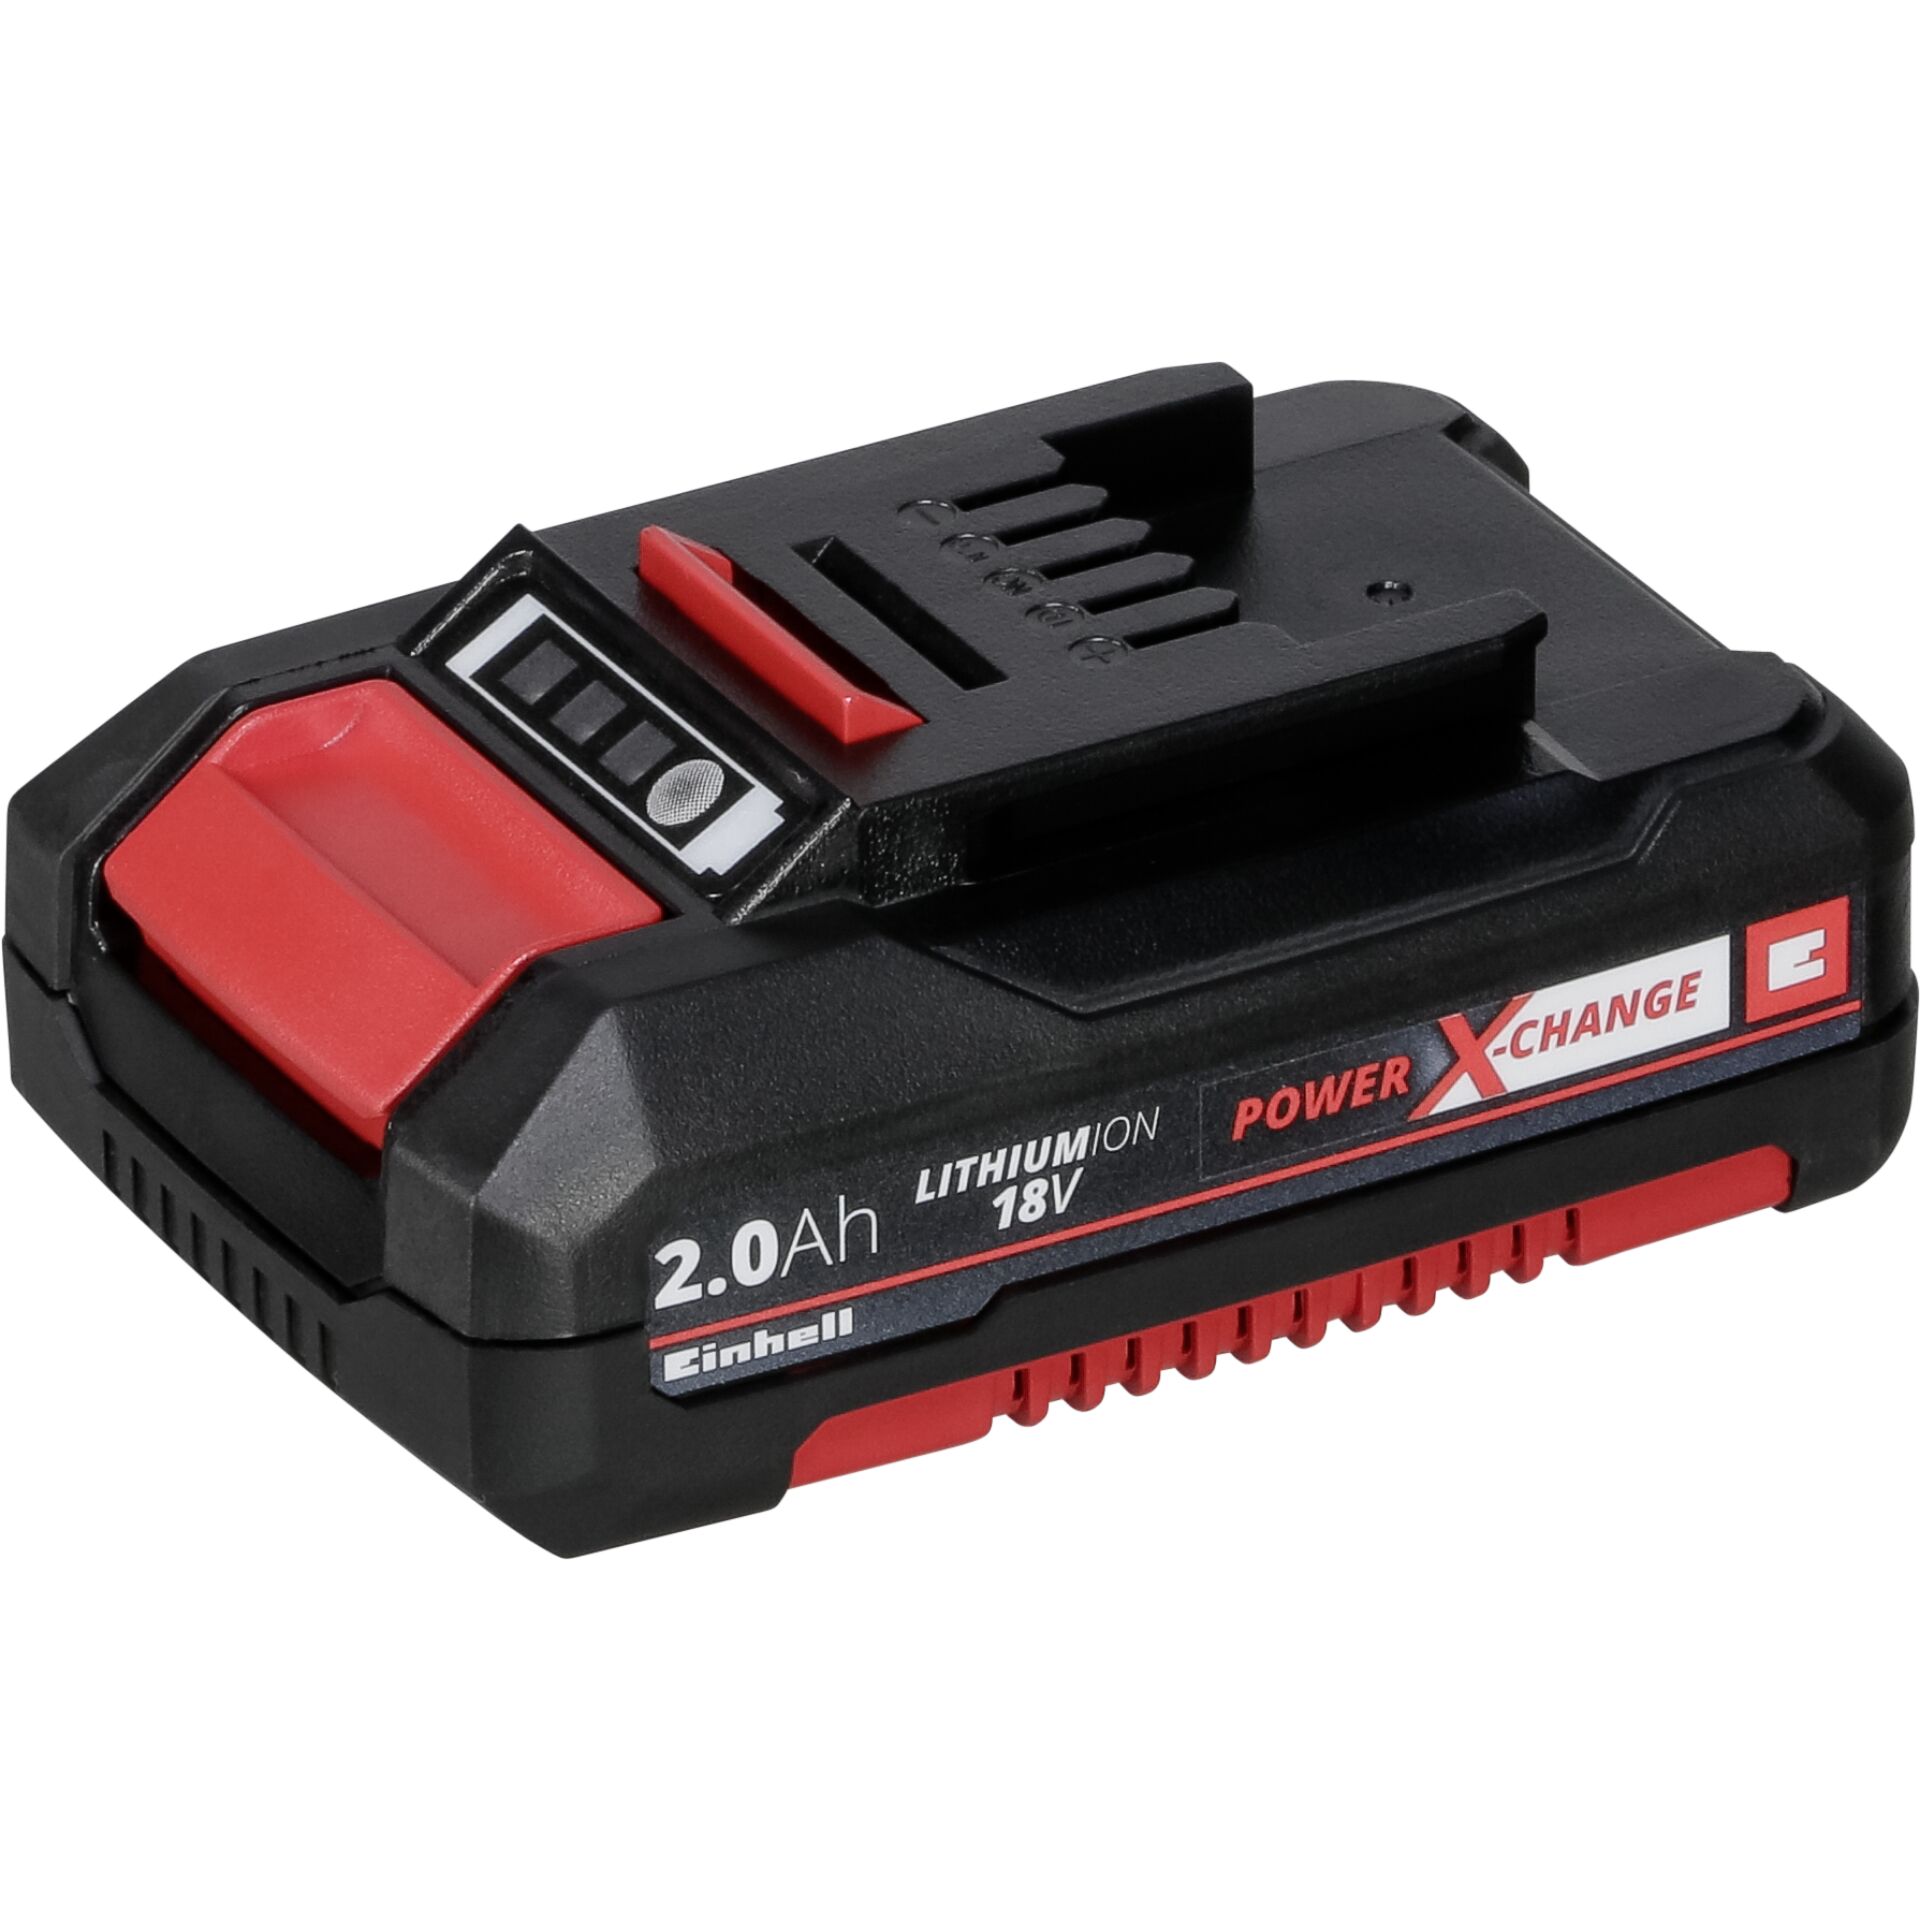 Einhell 4511395 cordless tool battery / charger